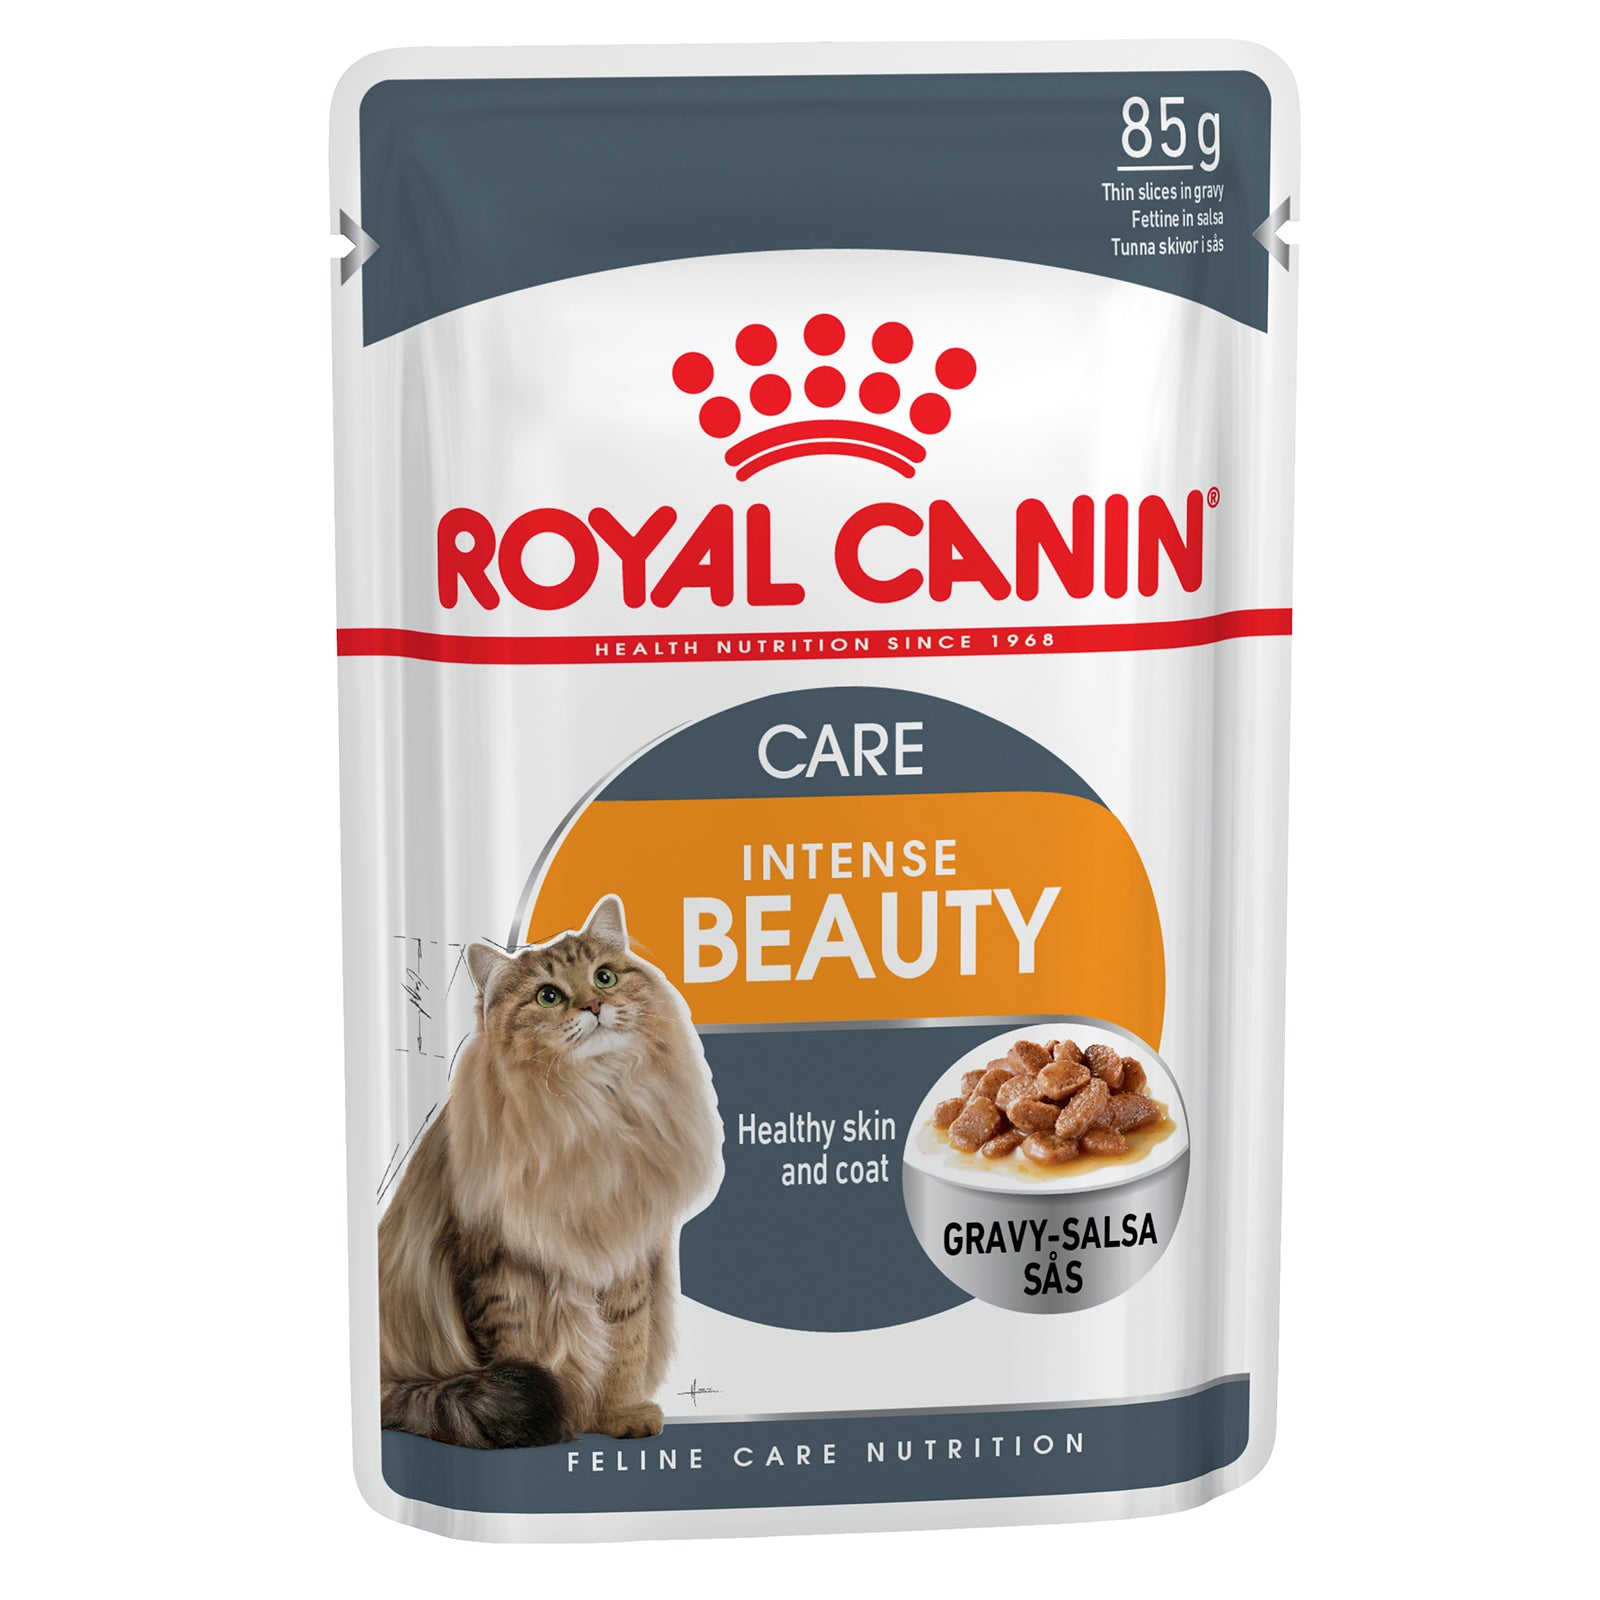 Royal Canin Cat Food Pouch Adult Hair & Skin Care in Gravy